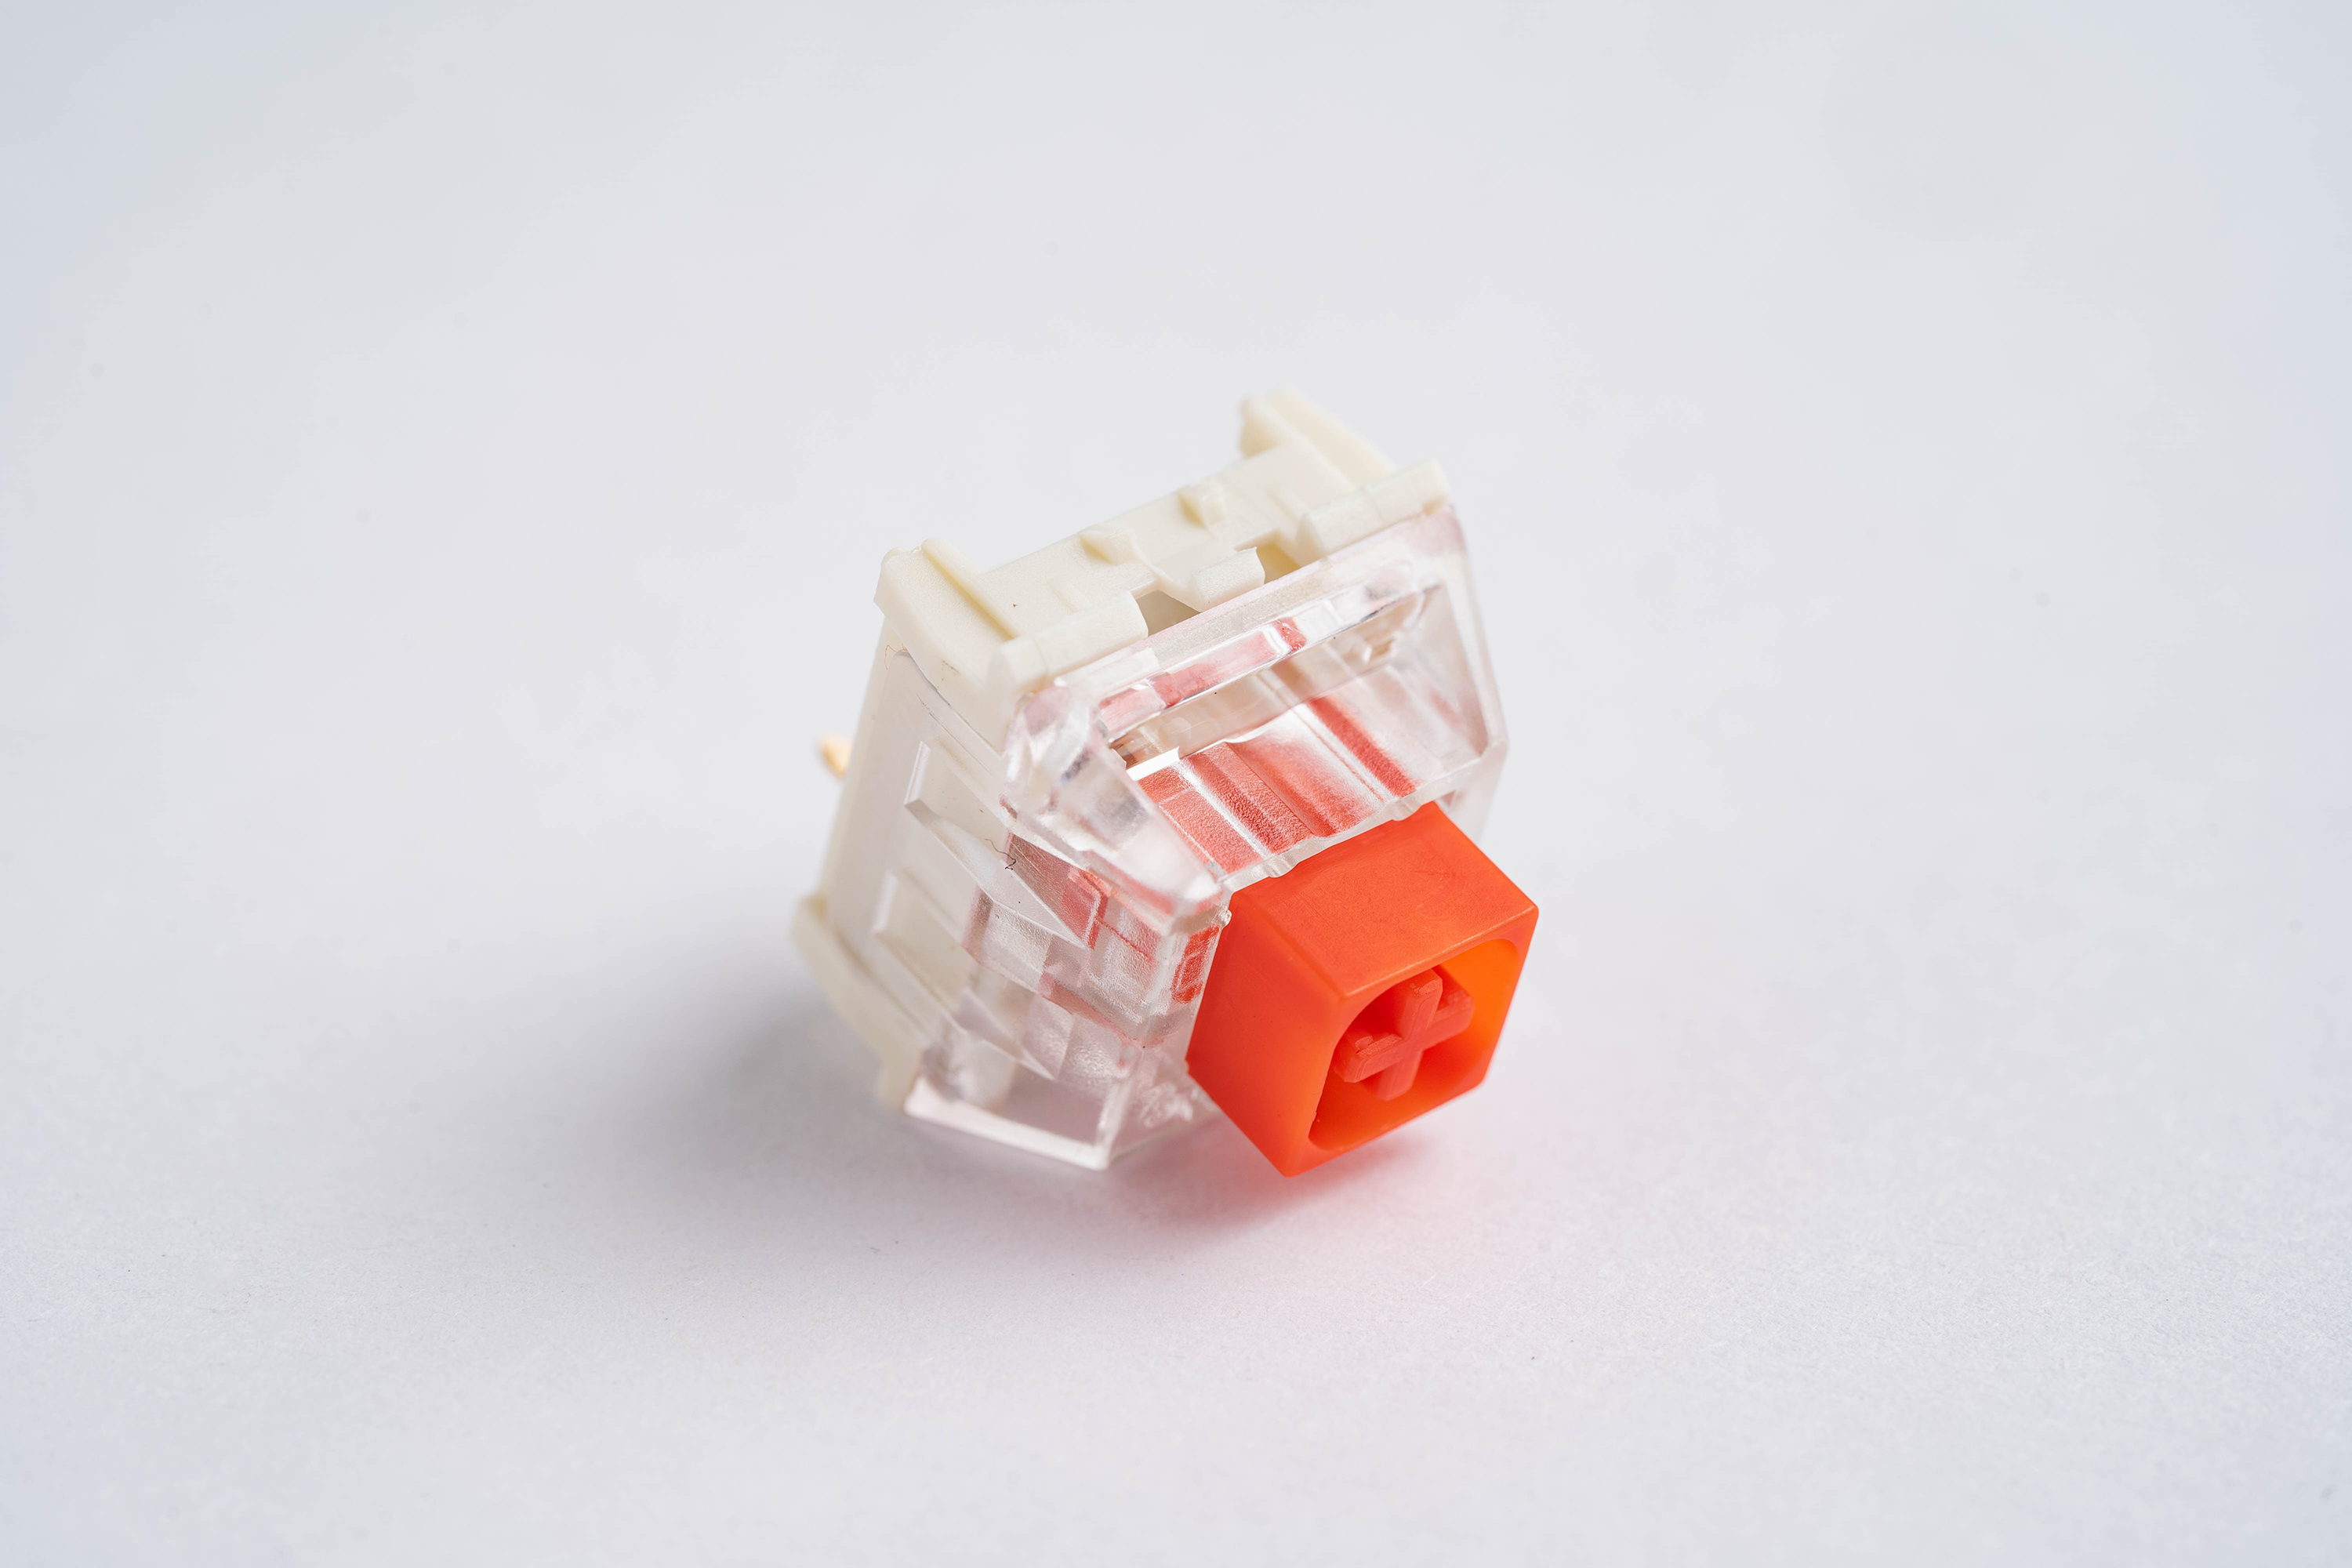 Kailh BOX Switches